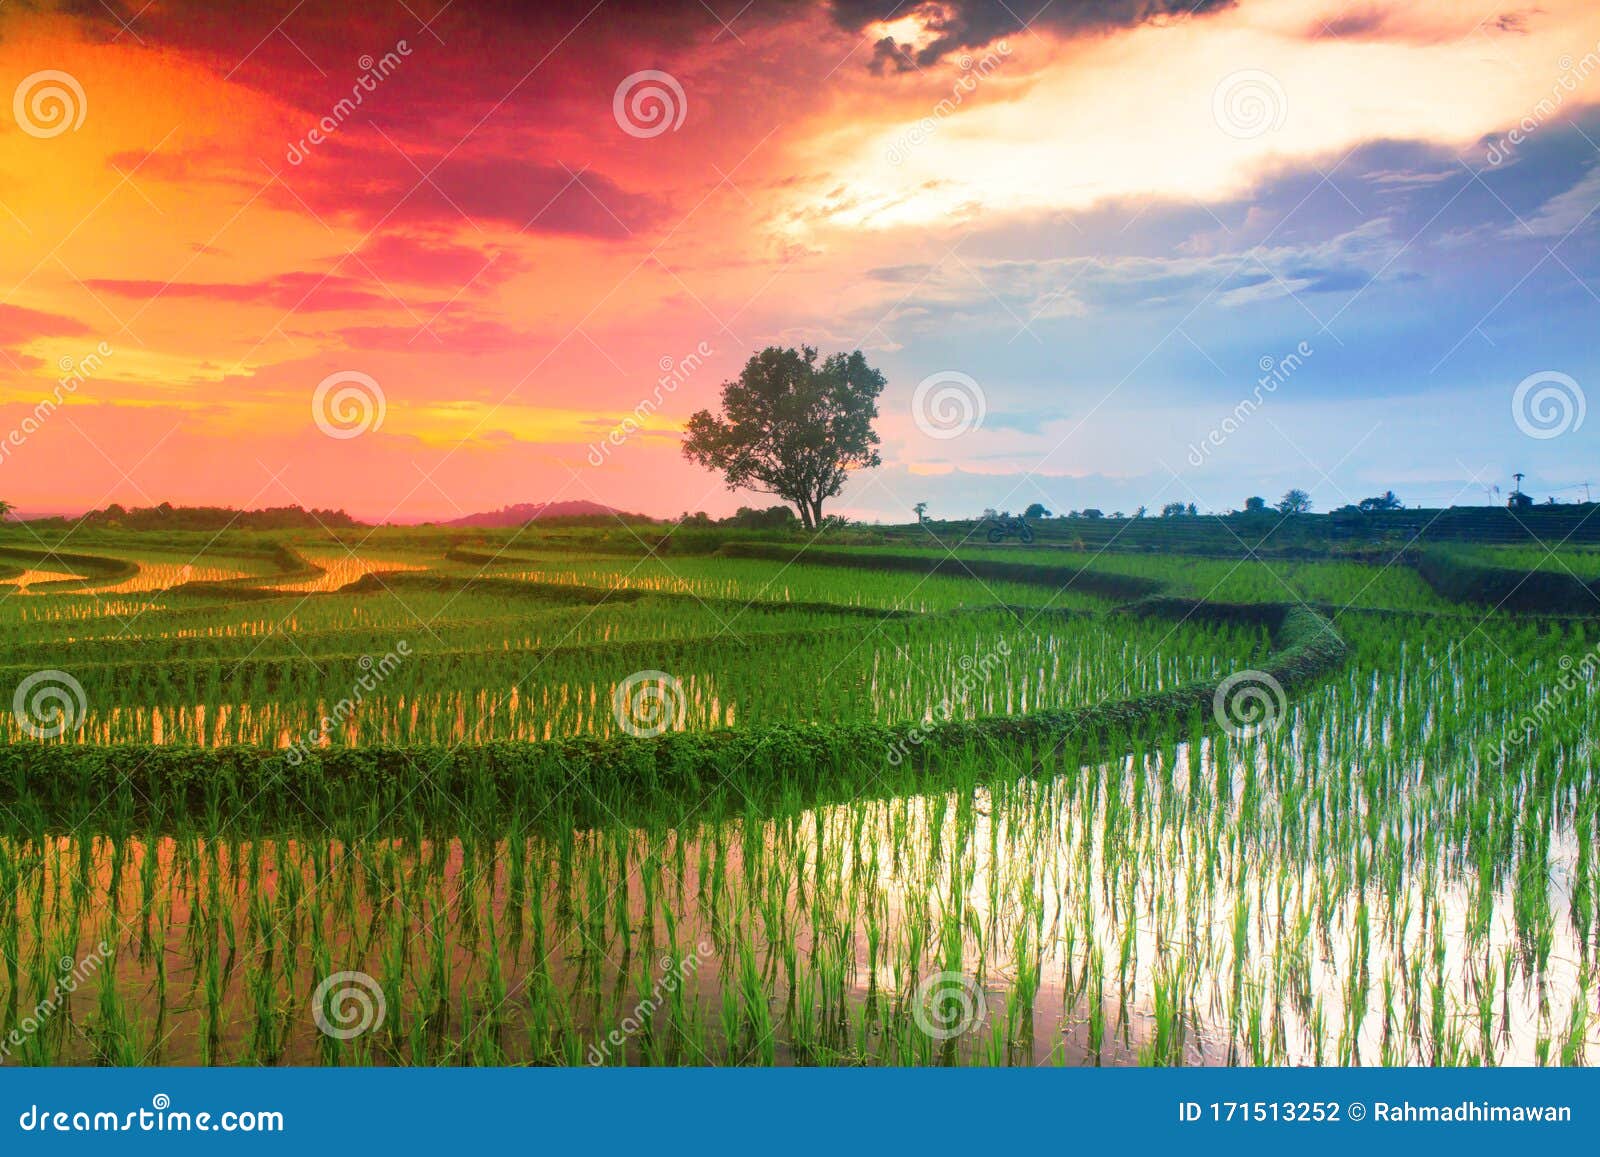 Amazing Landscape with Green Paddy Field with Beautiful Sunrise Background,  Beautiful Natural Wallpaper Stock Photo - Image of farmers, grain: 171513252